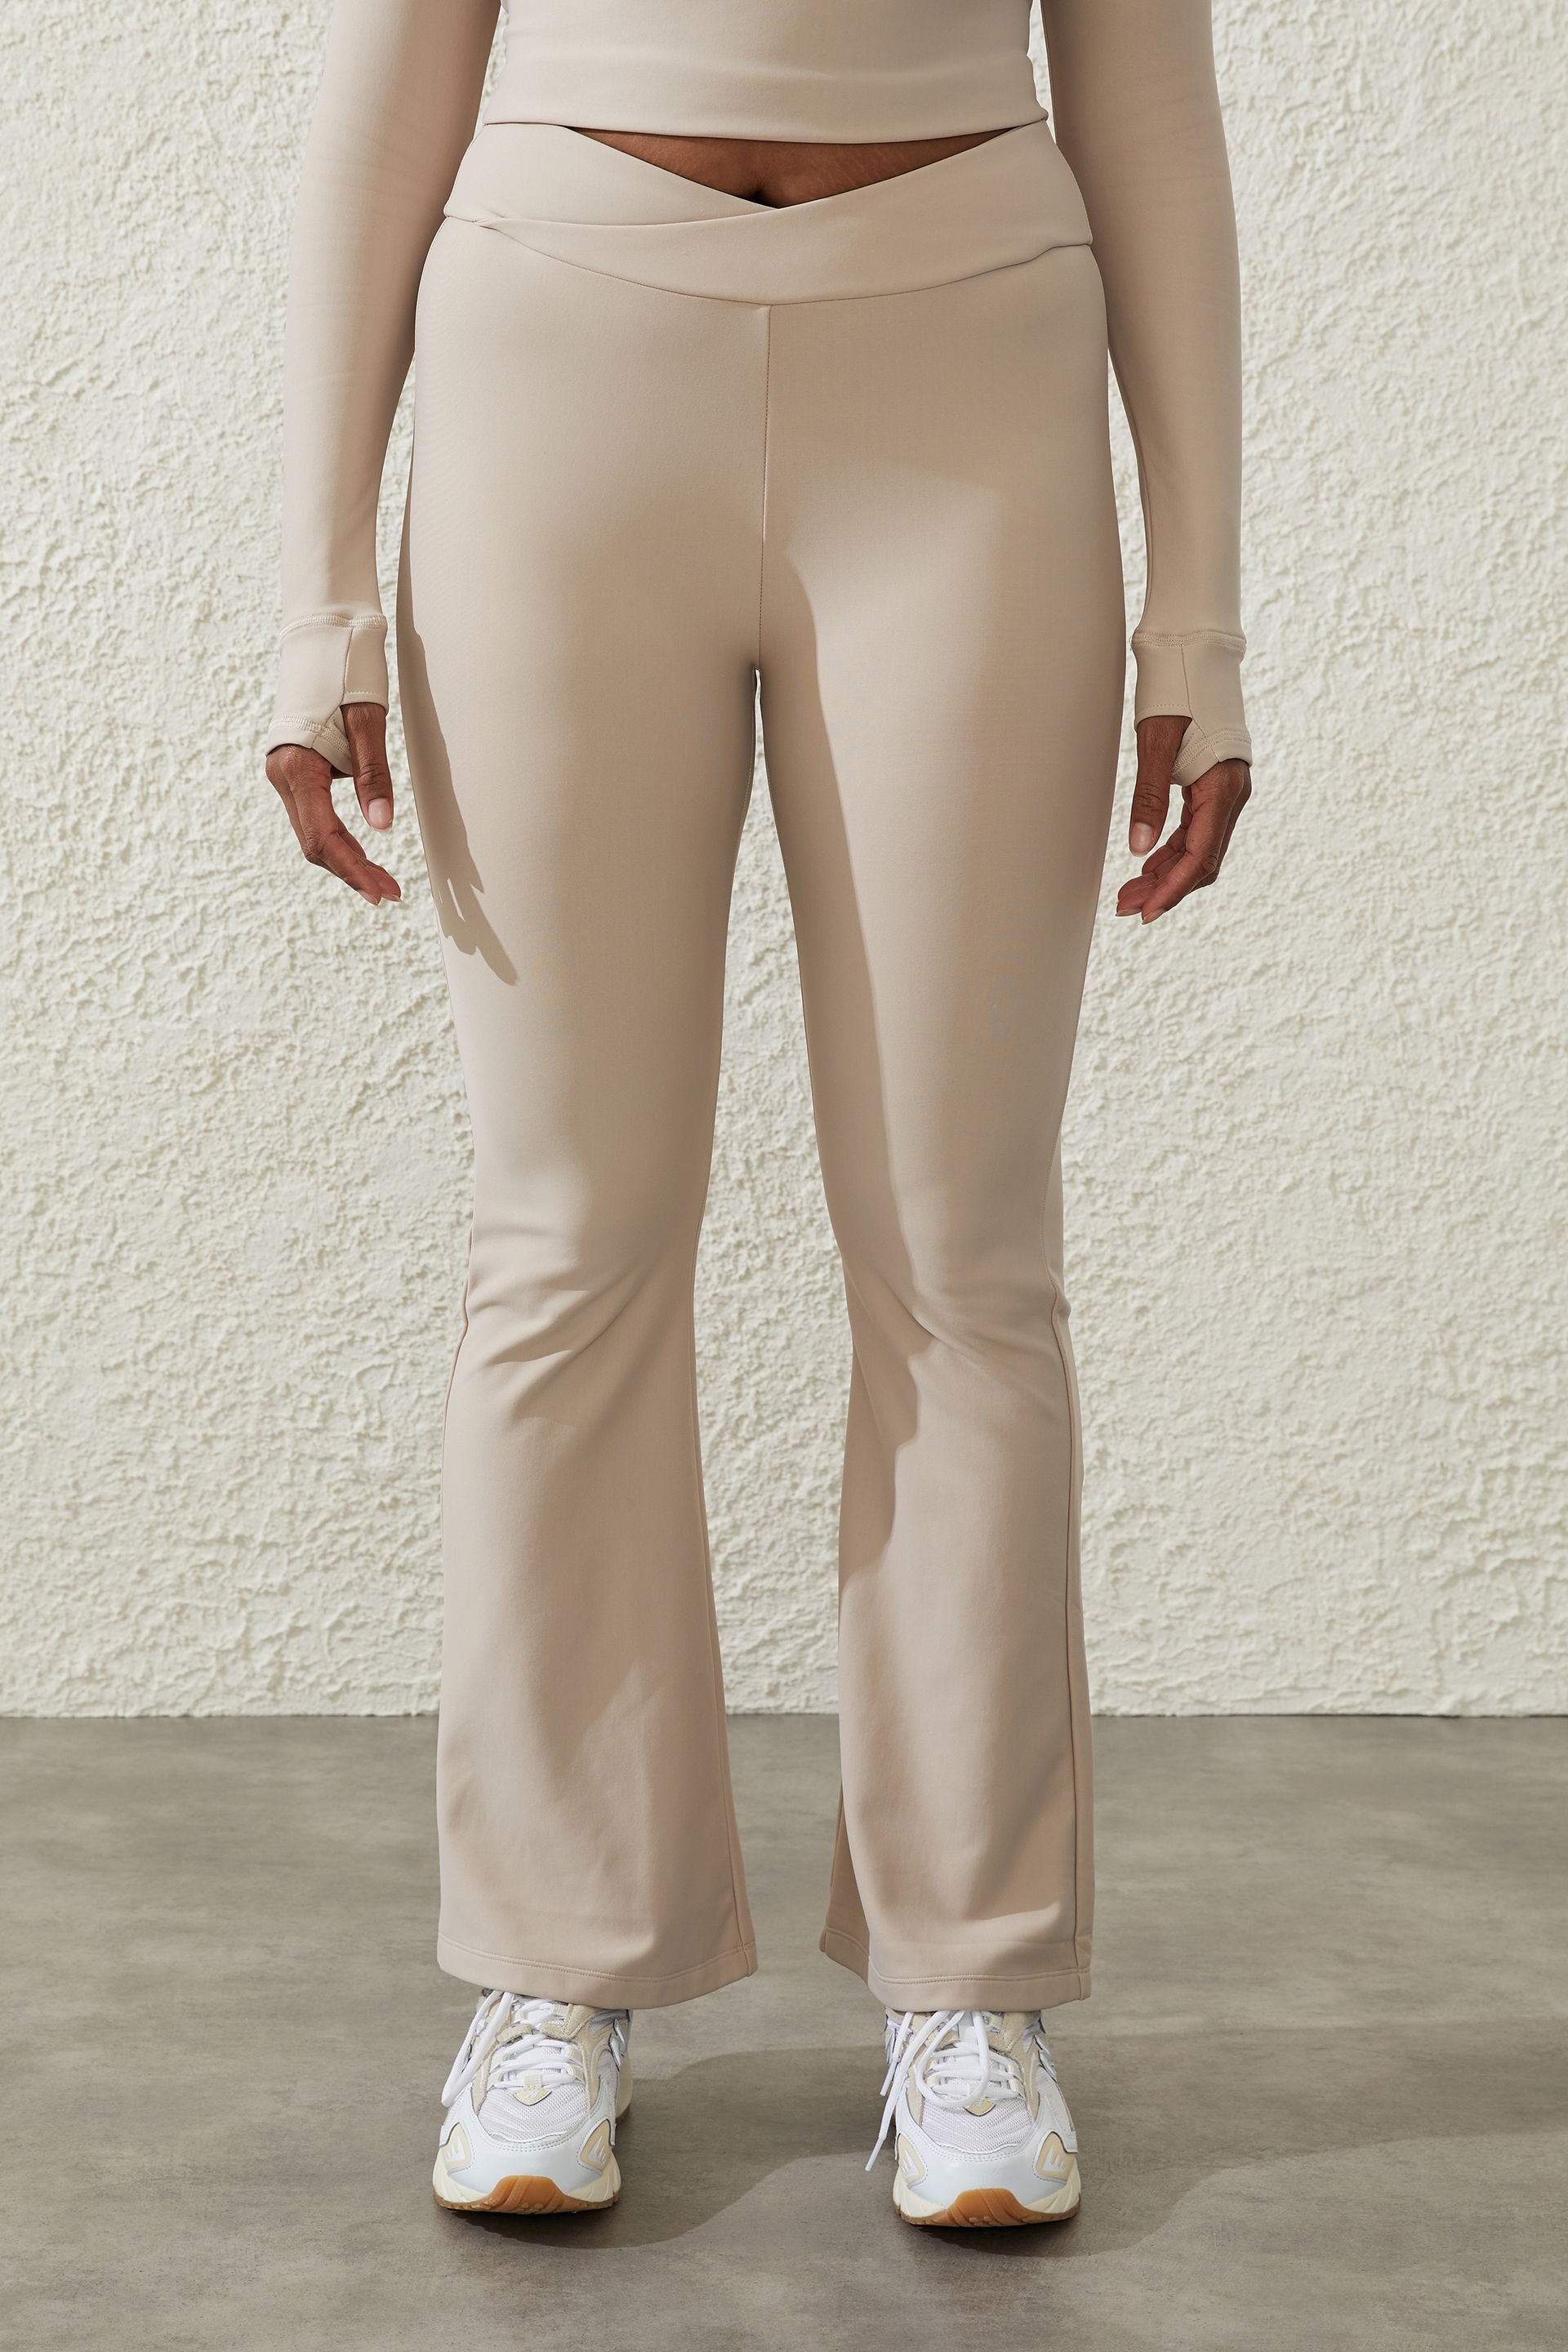 Fleece Lined Full Length Flare Pants by Cotton On Body Active Online, THE  ICONIC